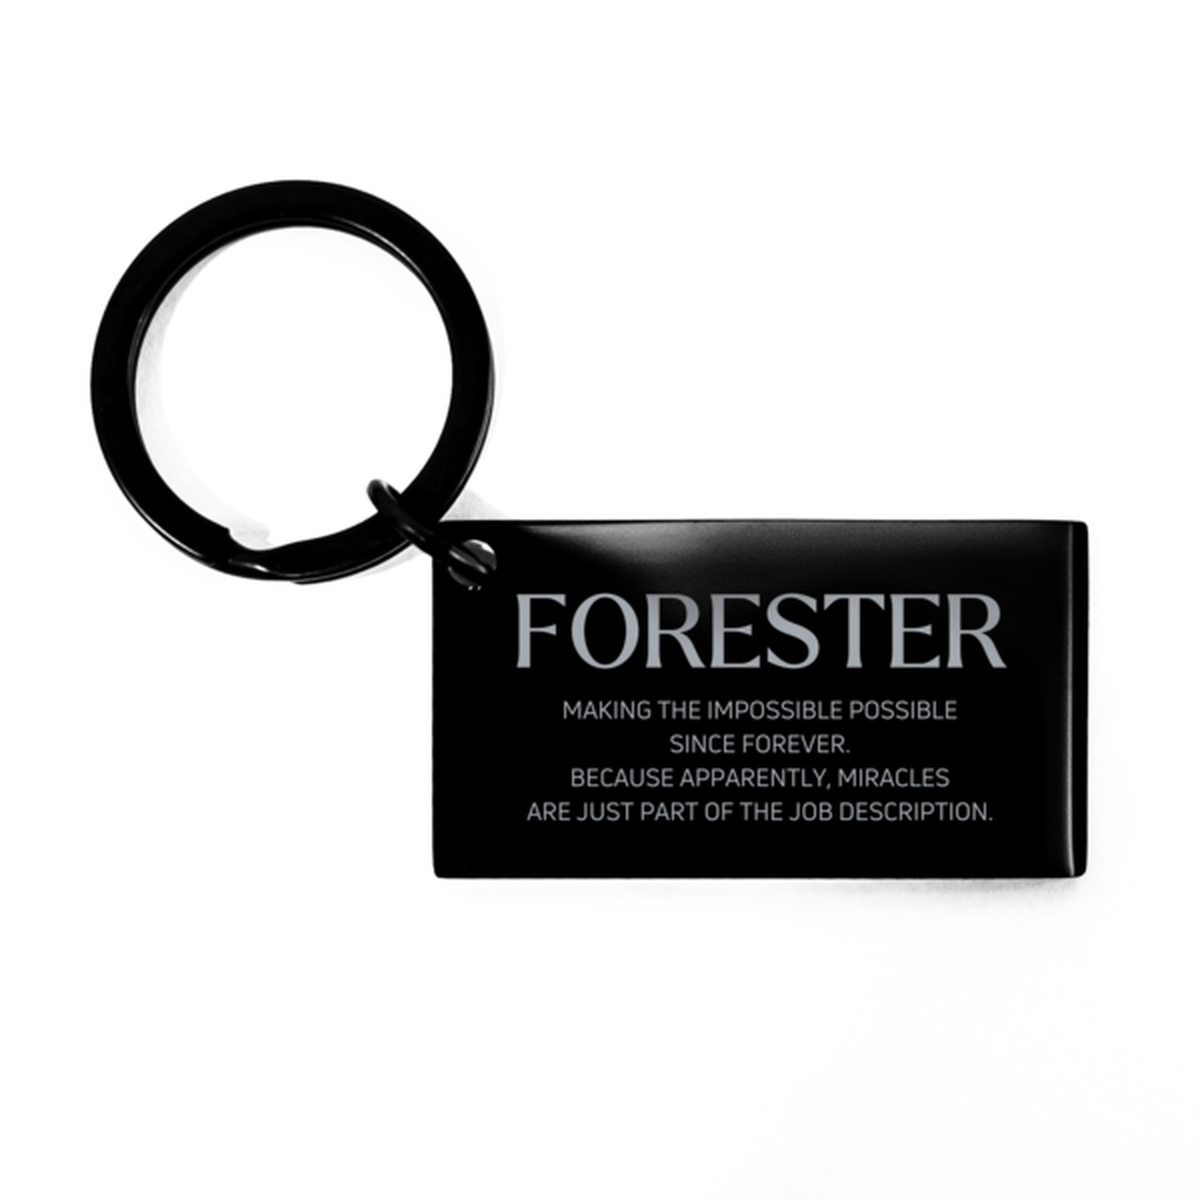 Funny Forester Gifts, Miracles are just part of the job description, Inspirational Birthday Keychain For Forester, Men, Women, Coworkers, Friends, Boss